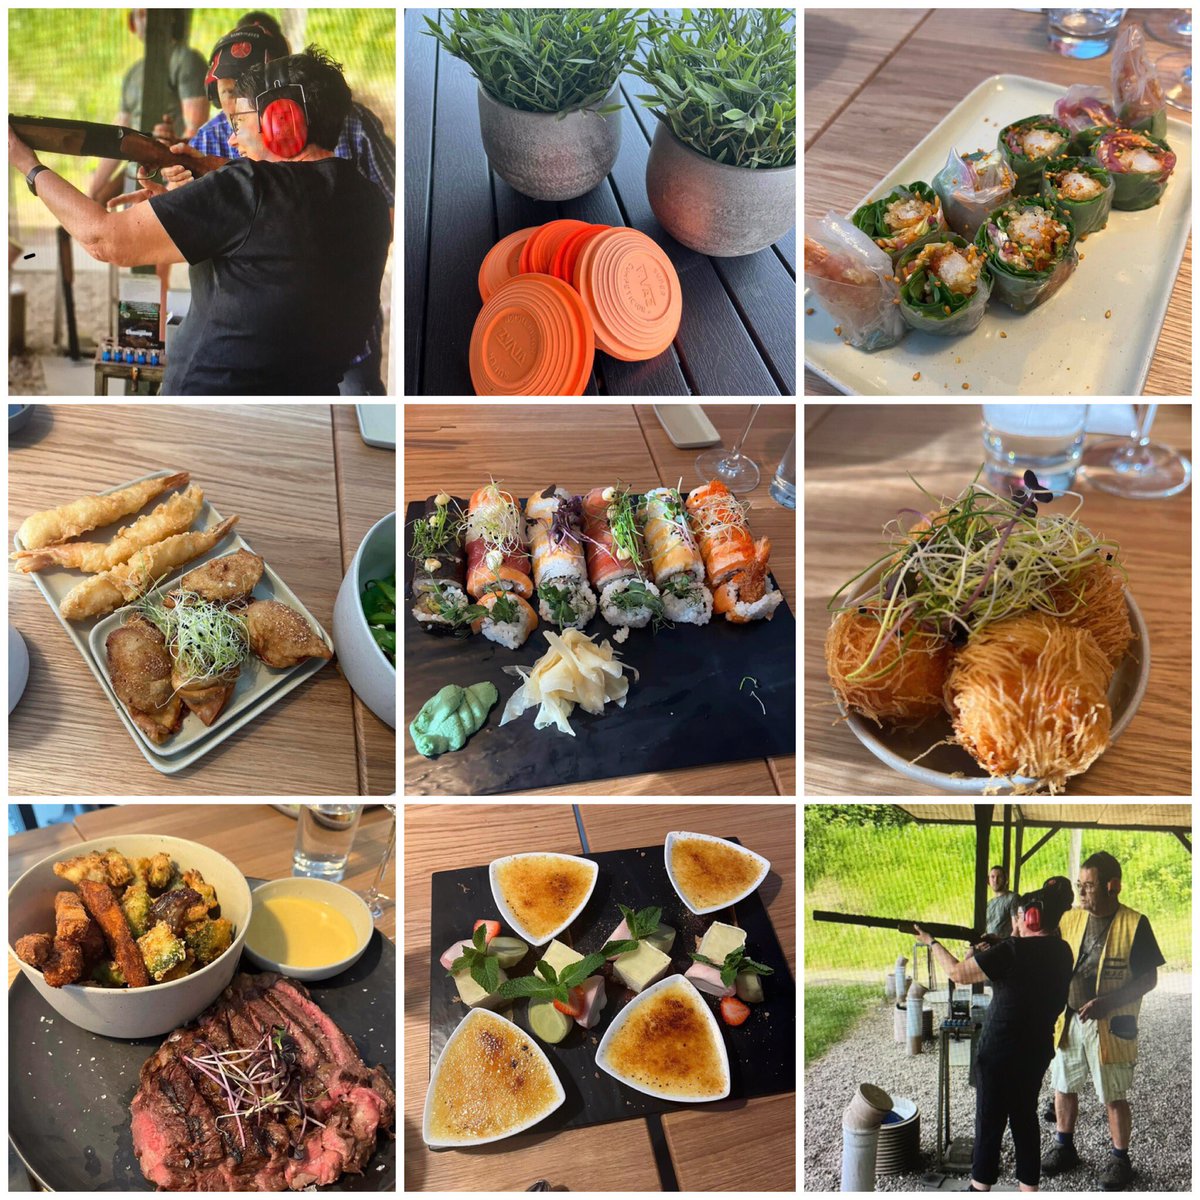 Forgot to post pics from our Summerparty at work Friday last week 🔫🍱🍤🍷🥃🍸🍾 First clay pigeon shooting and next we ate at a very expensive Japanese restaurant ❤️ We had Lots of fun 💖